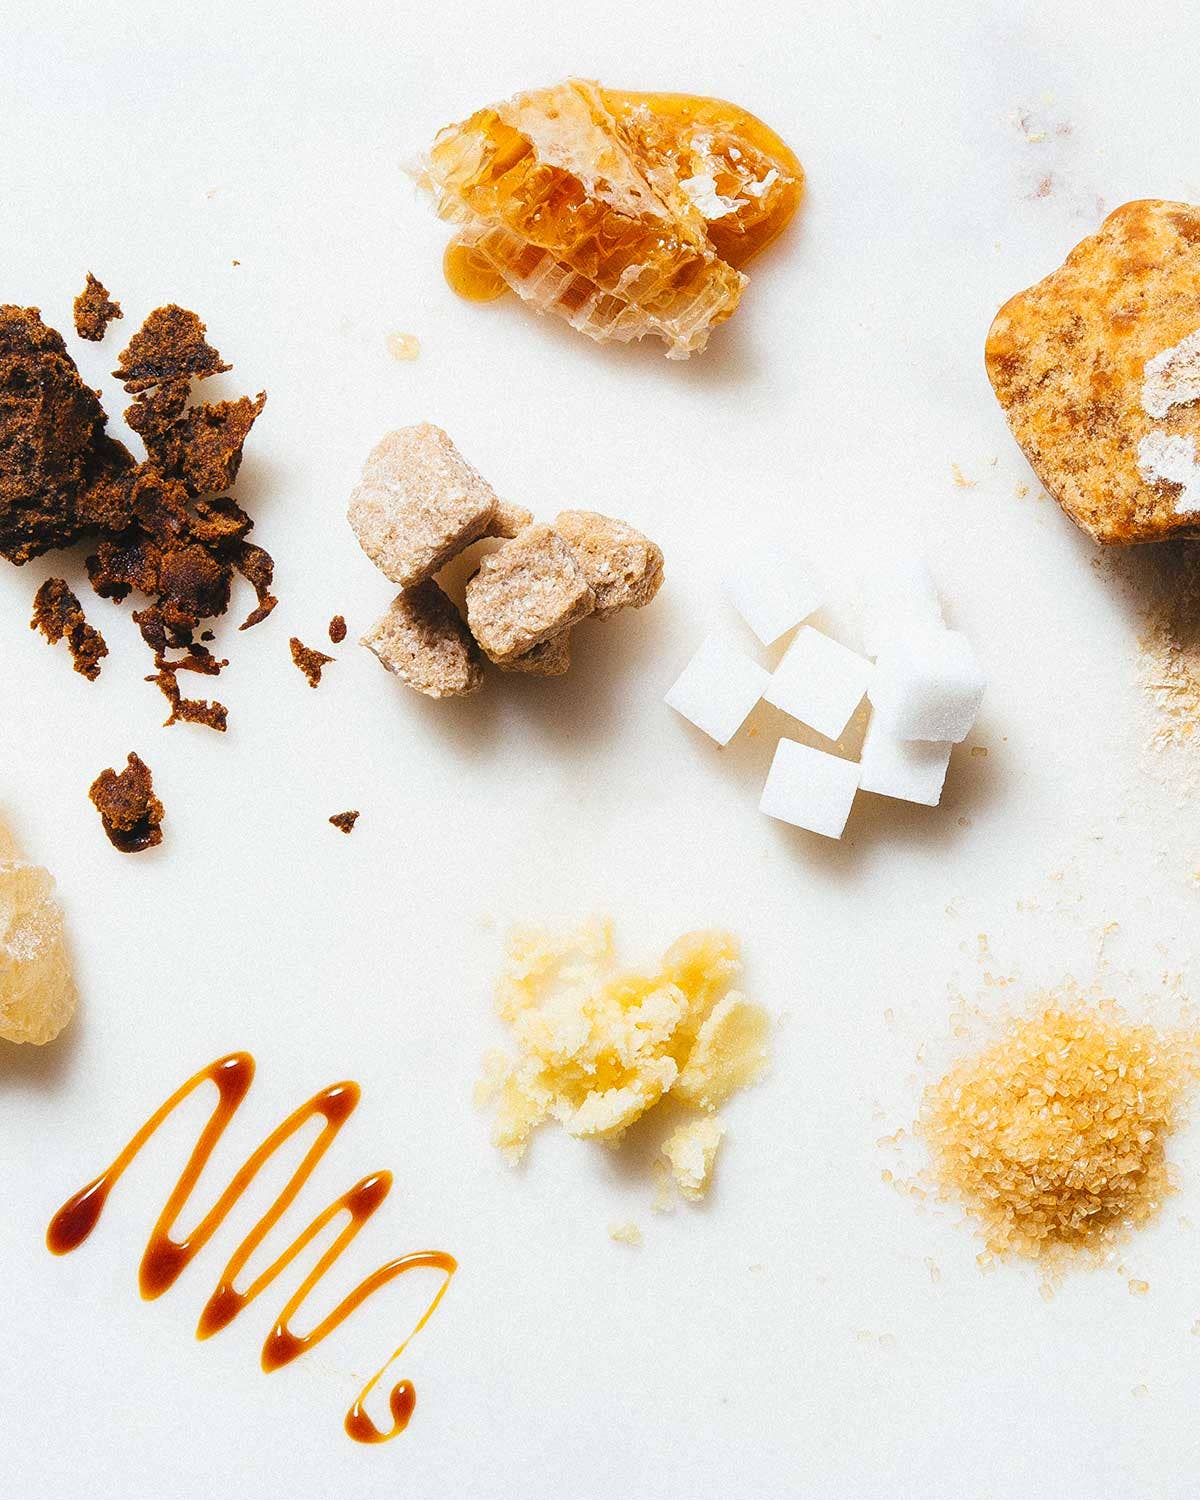 The Complete Guide to Sugar Around the World